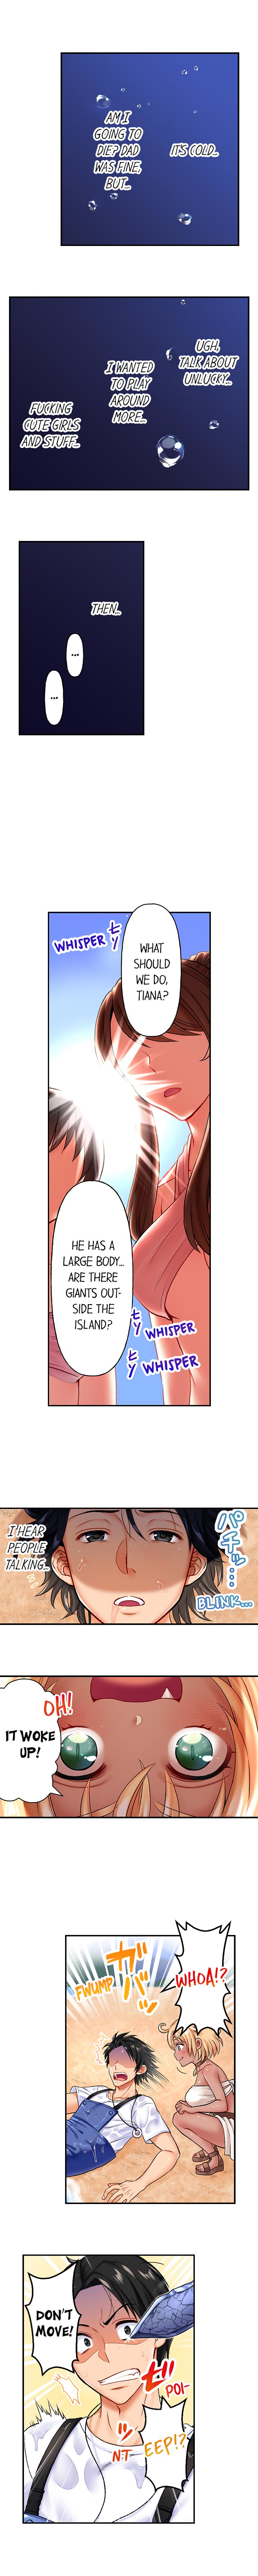 Girls' Island: Only I Can Fuck Them All! - Chapter 1 Page 3